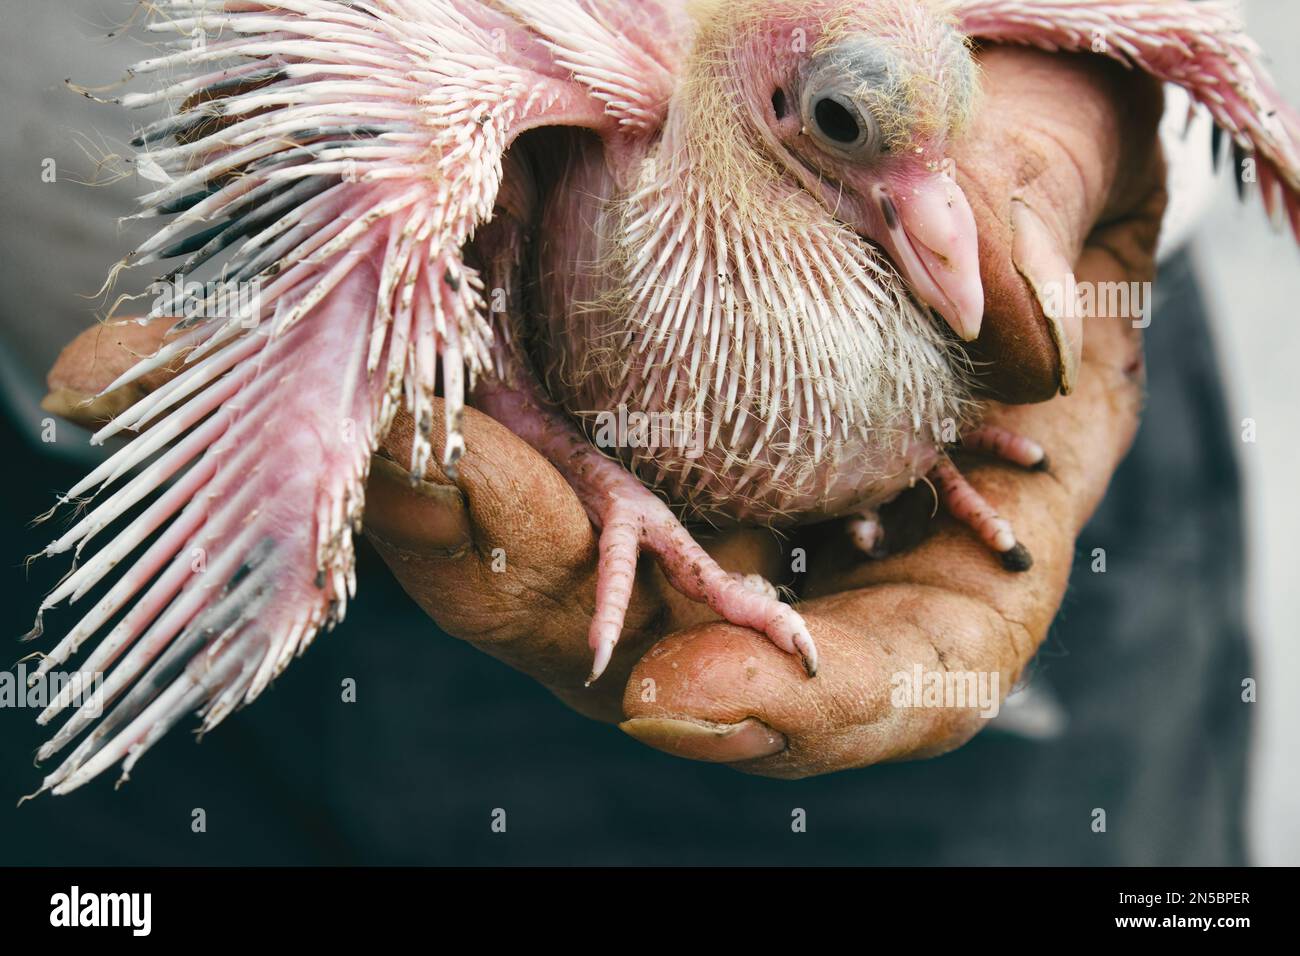 Close-up of a baby pigeon with no feathers being held in a person's hand Stock Photo